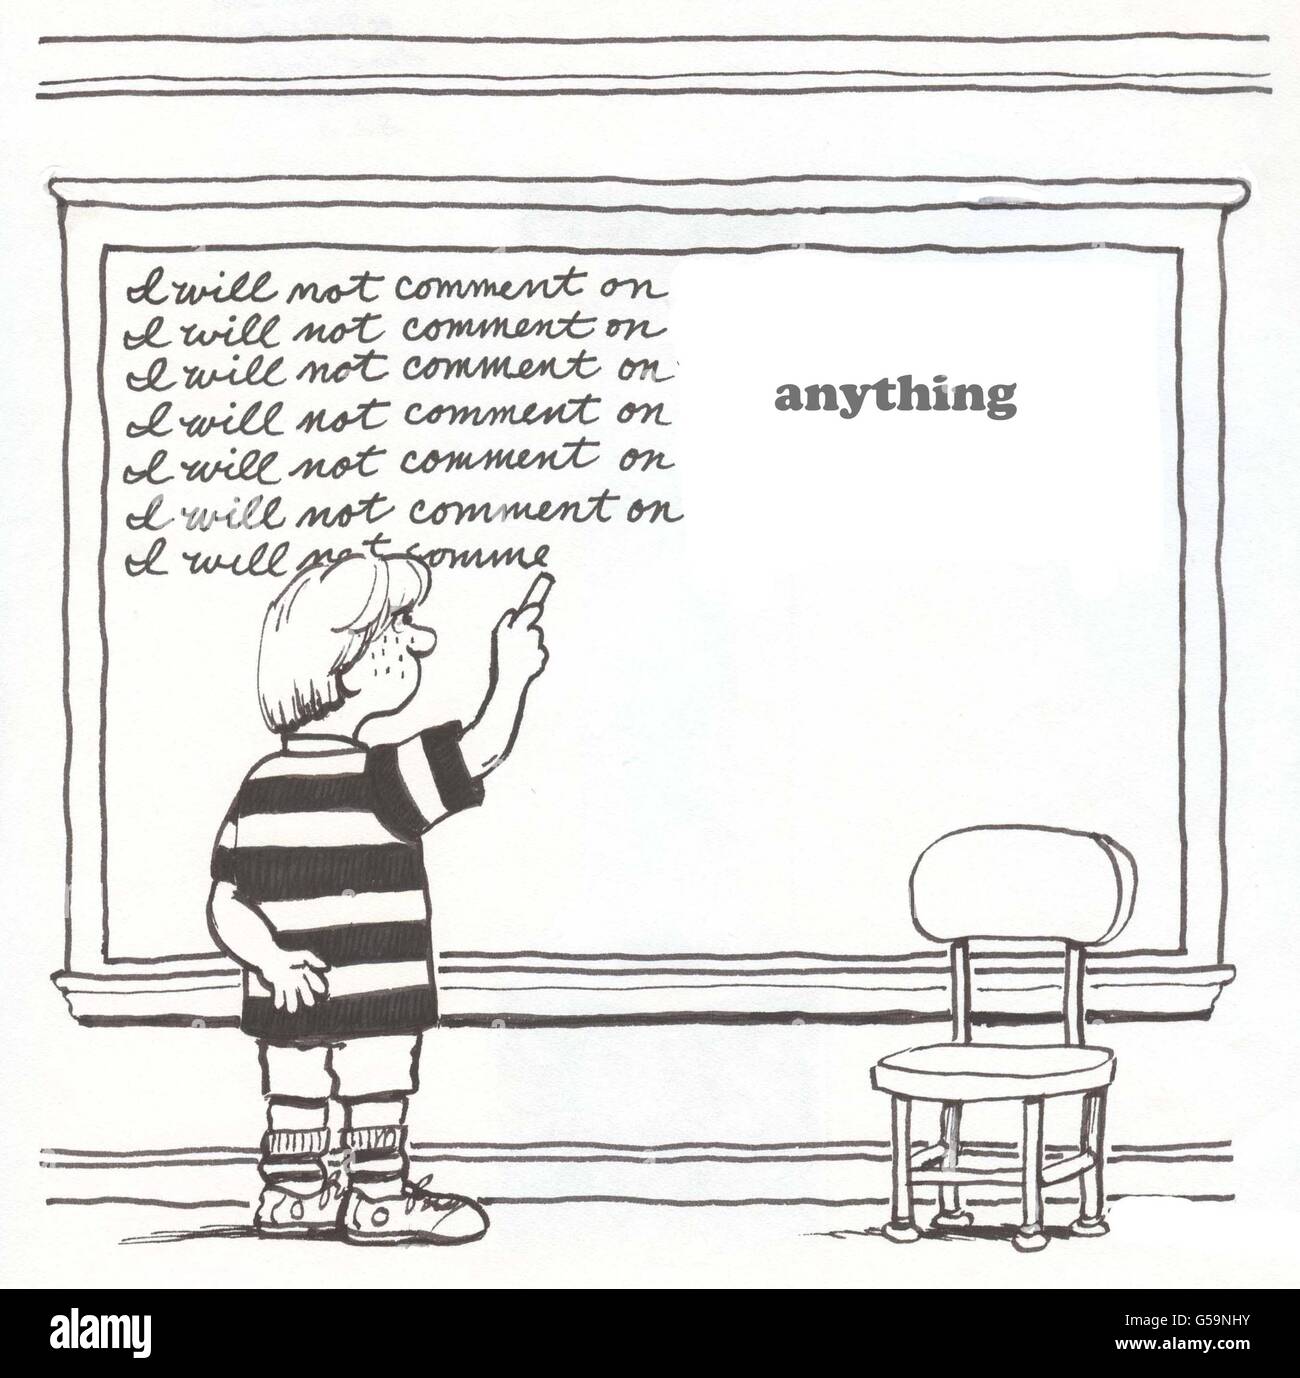 Education cartoon about a student told to write that he will not comment on anything. Stock Photo